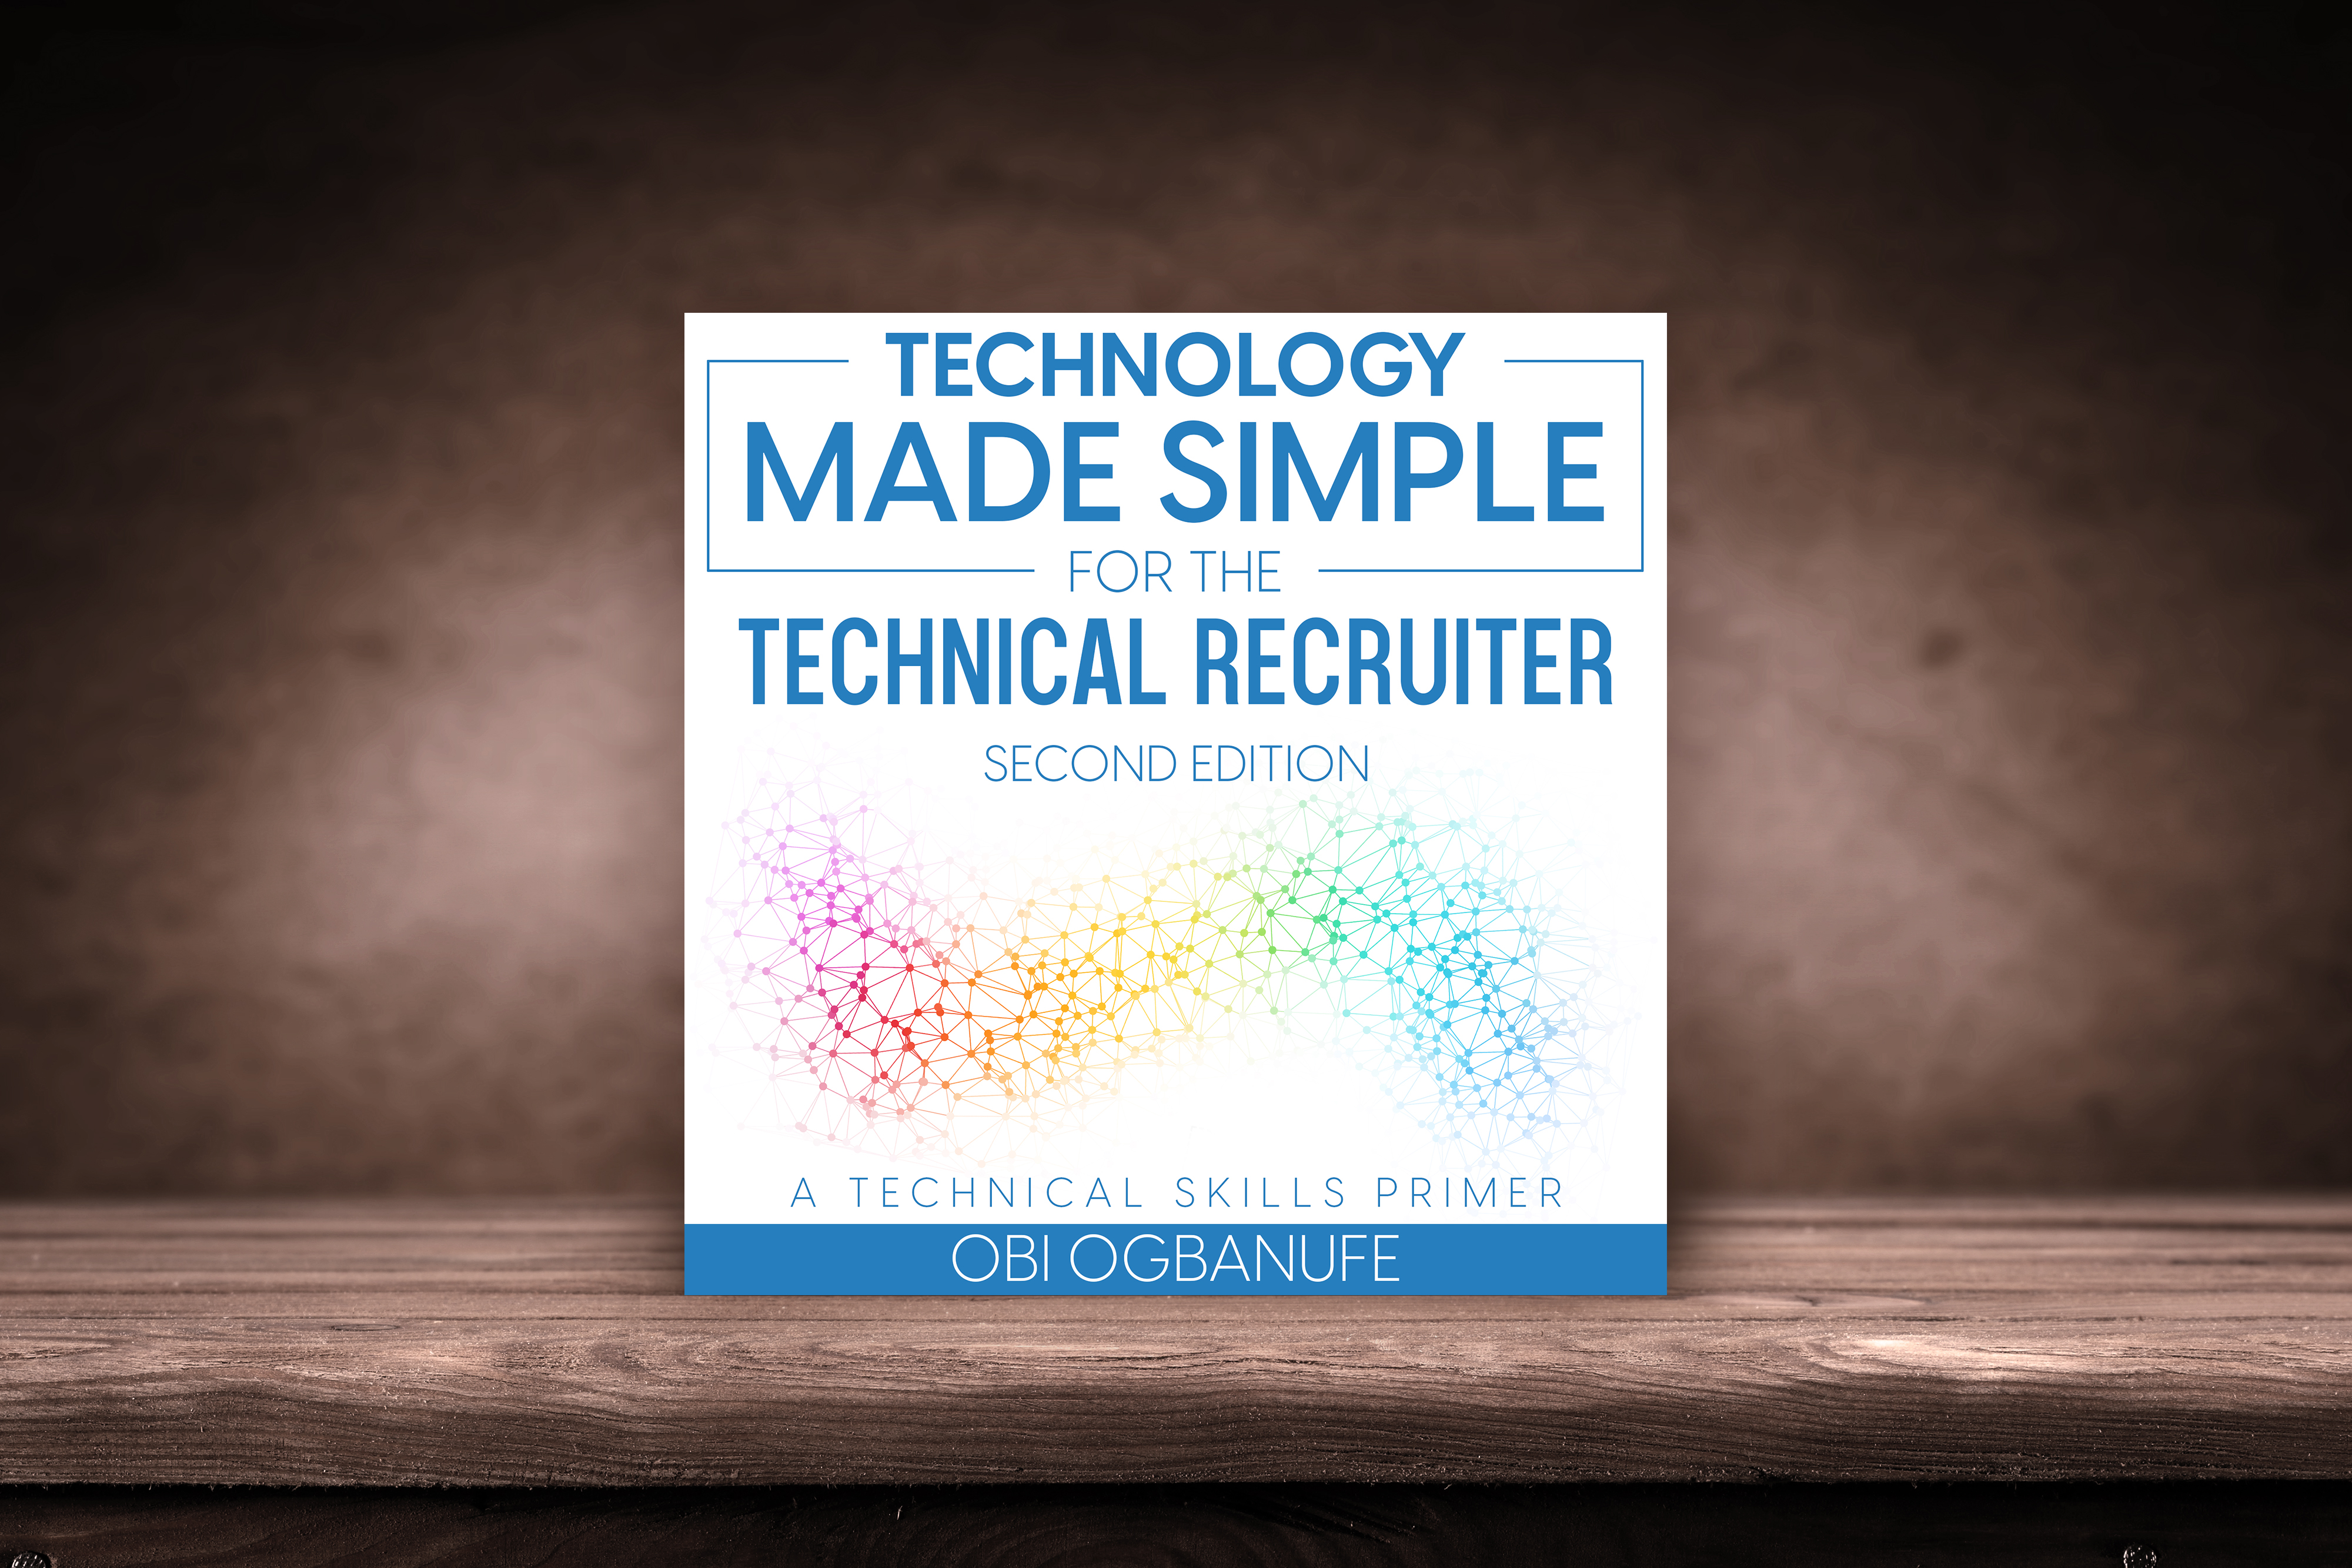 Audio, Technology Made Simple for the Technical Recruiter